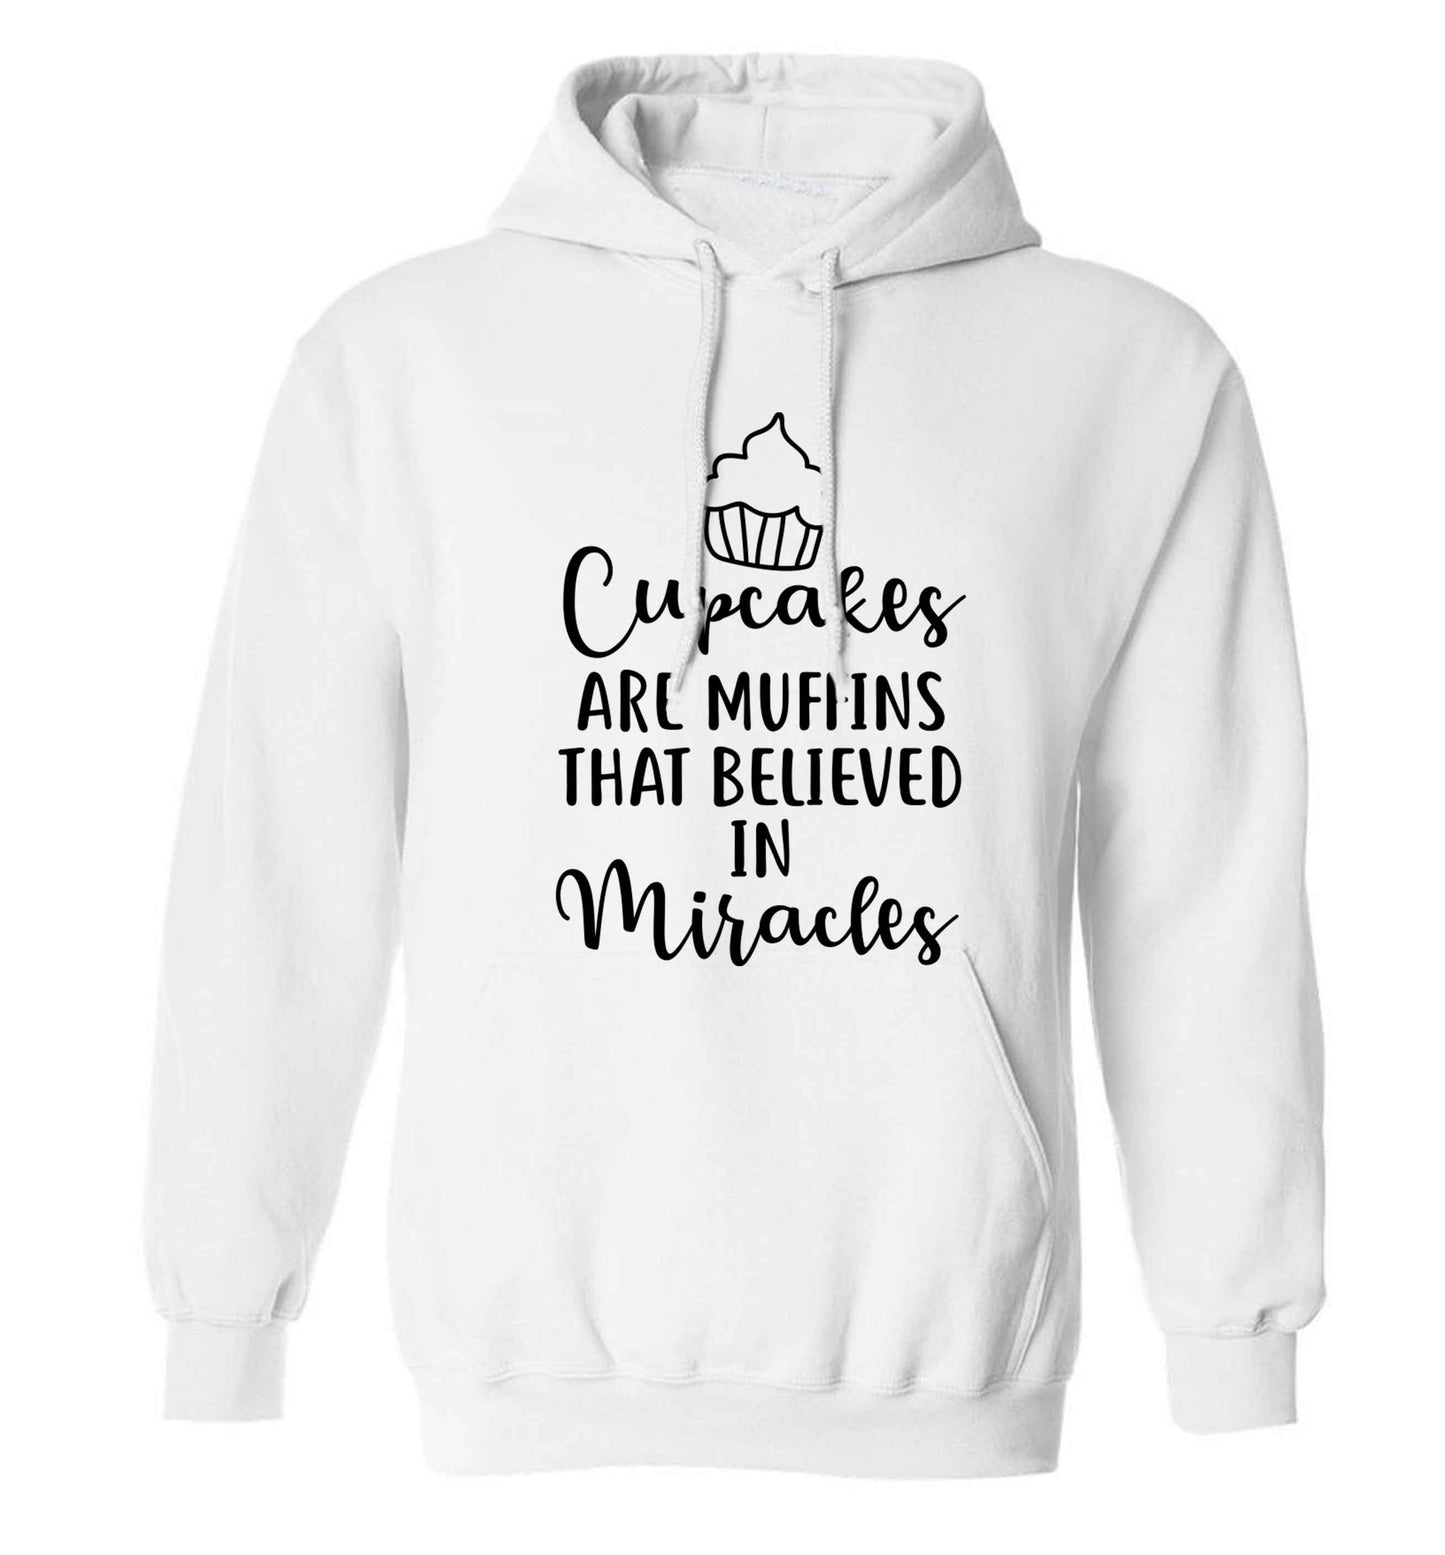 Cupcakes muffins that believed in miracles adults unisex white hoodie 2XL